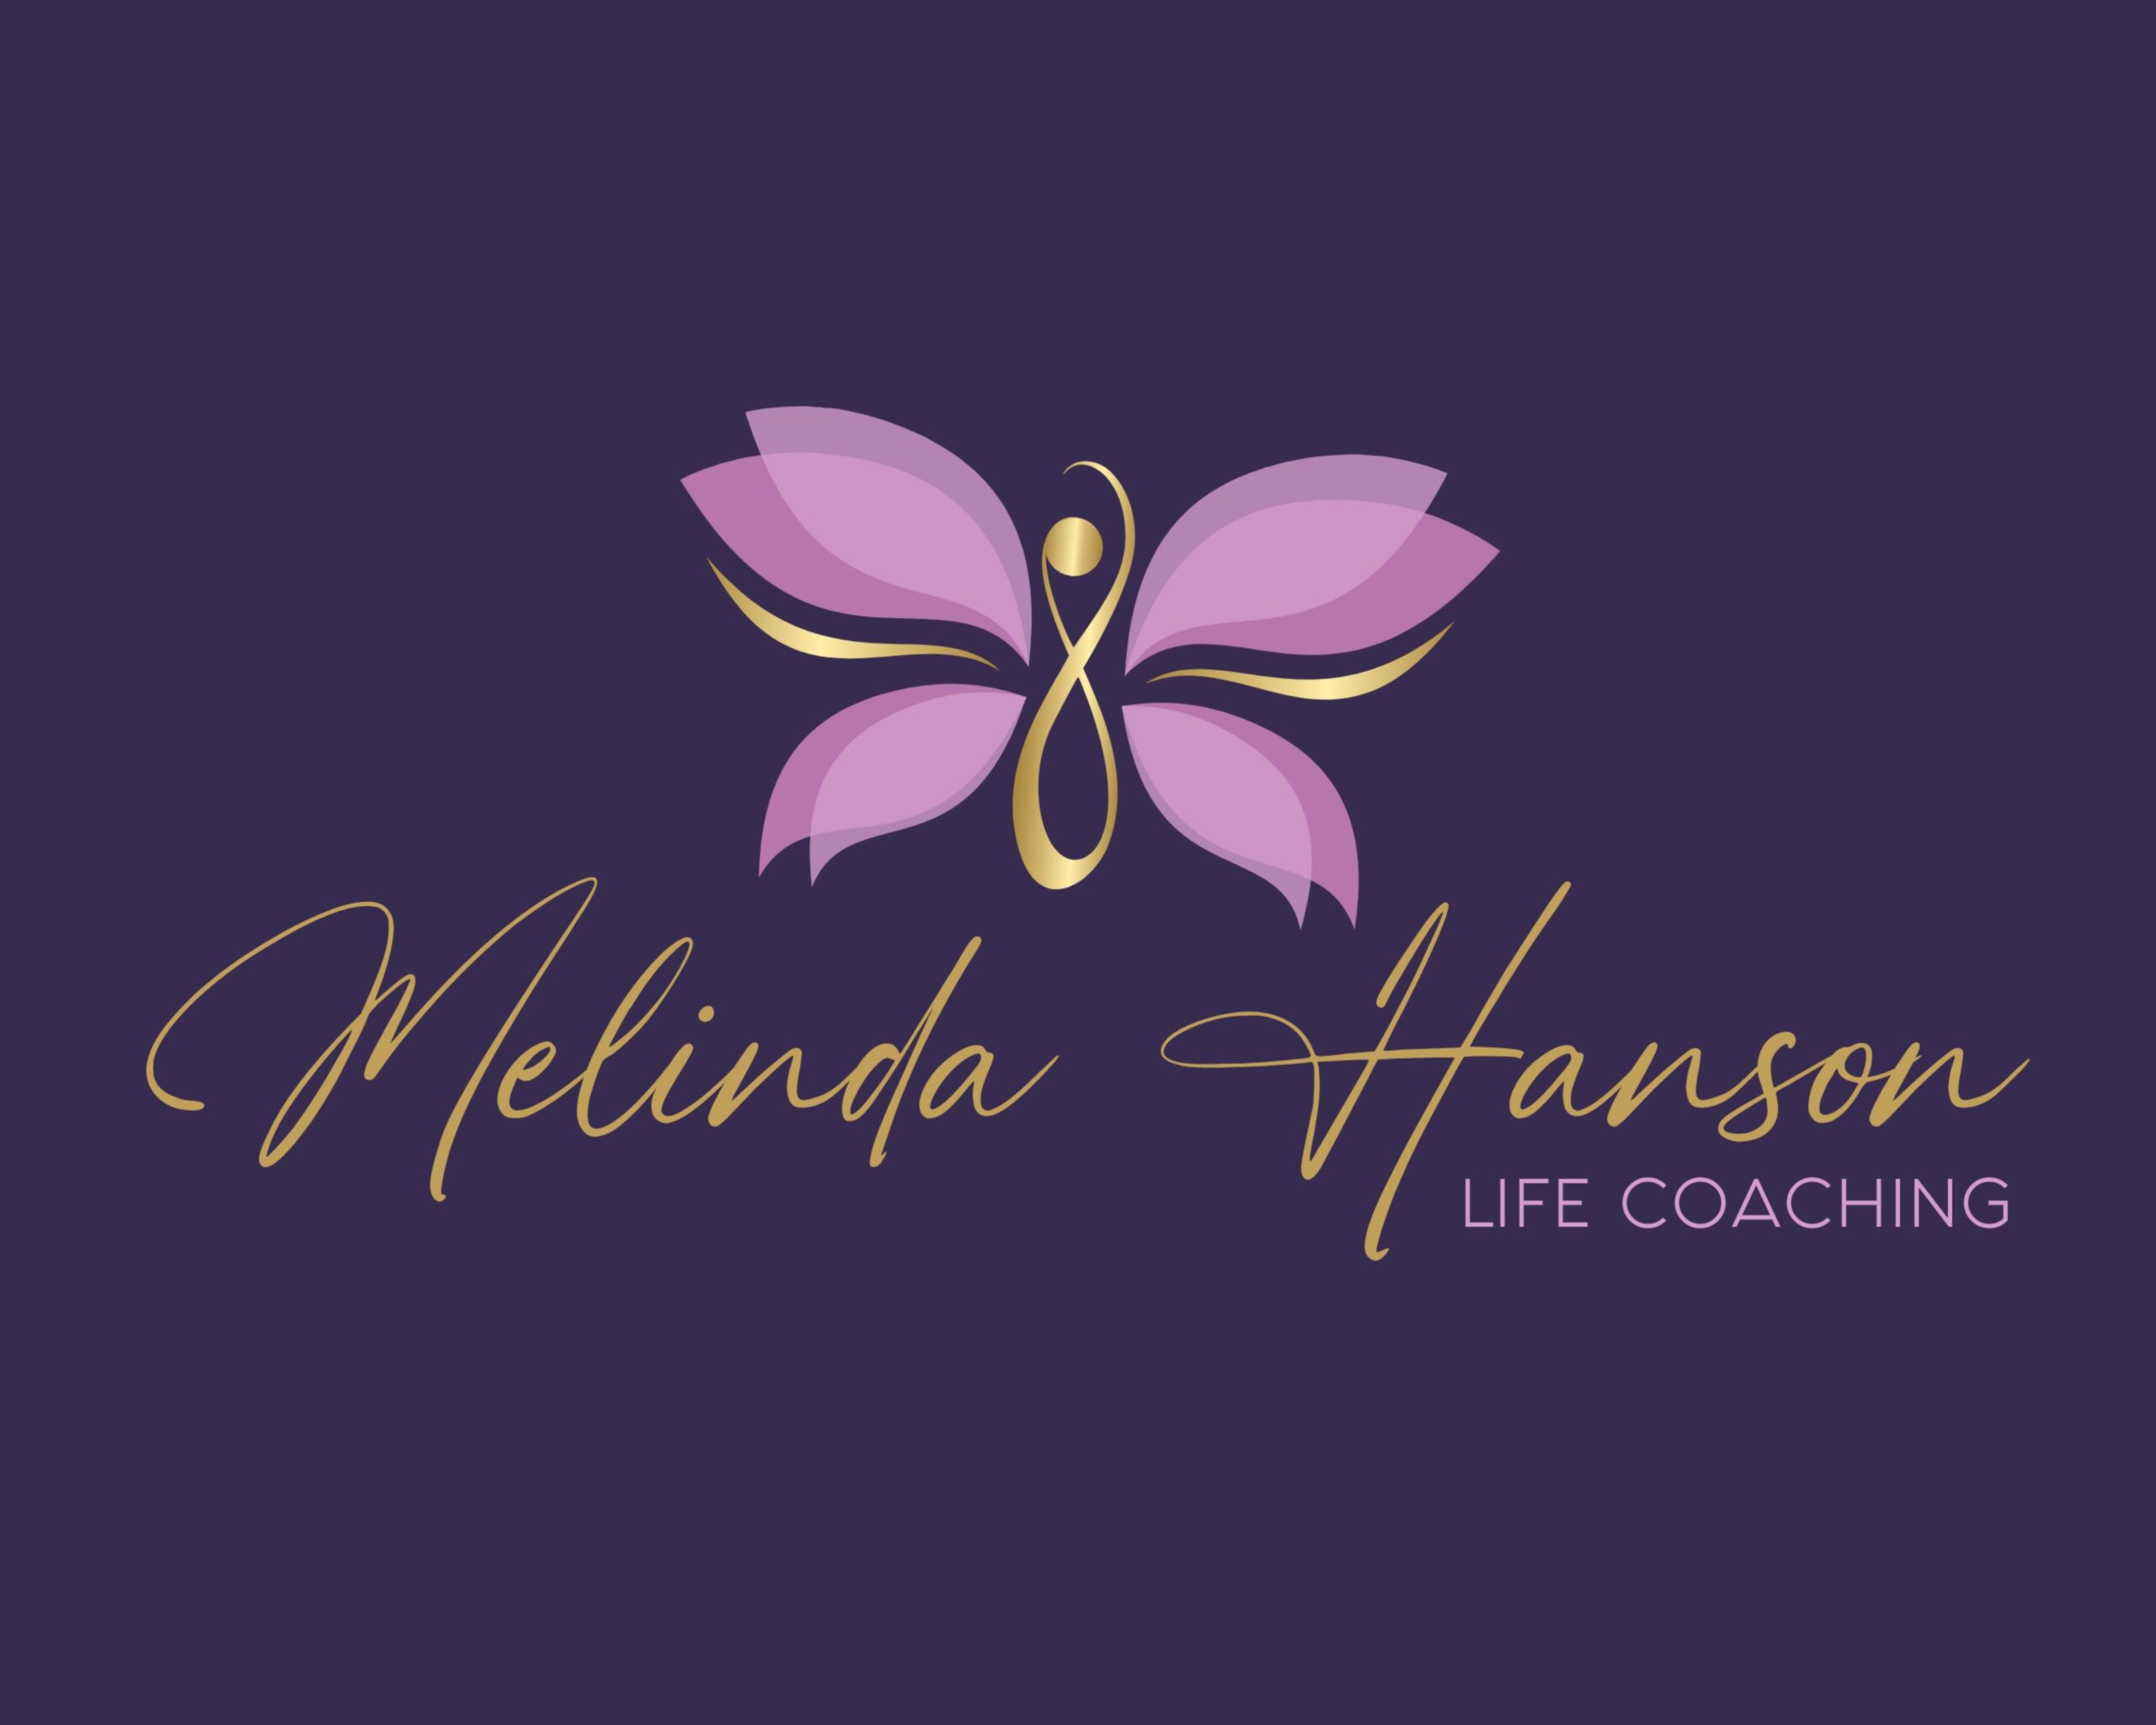 Butterfly Premade Logo Designs - Wellness, Psychology, Jewelry Logo, Infinity Symbol, Purple, Gold Logos: Submark Circle Logo and Watermarks